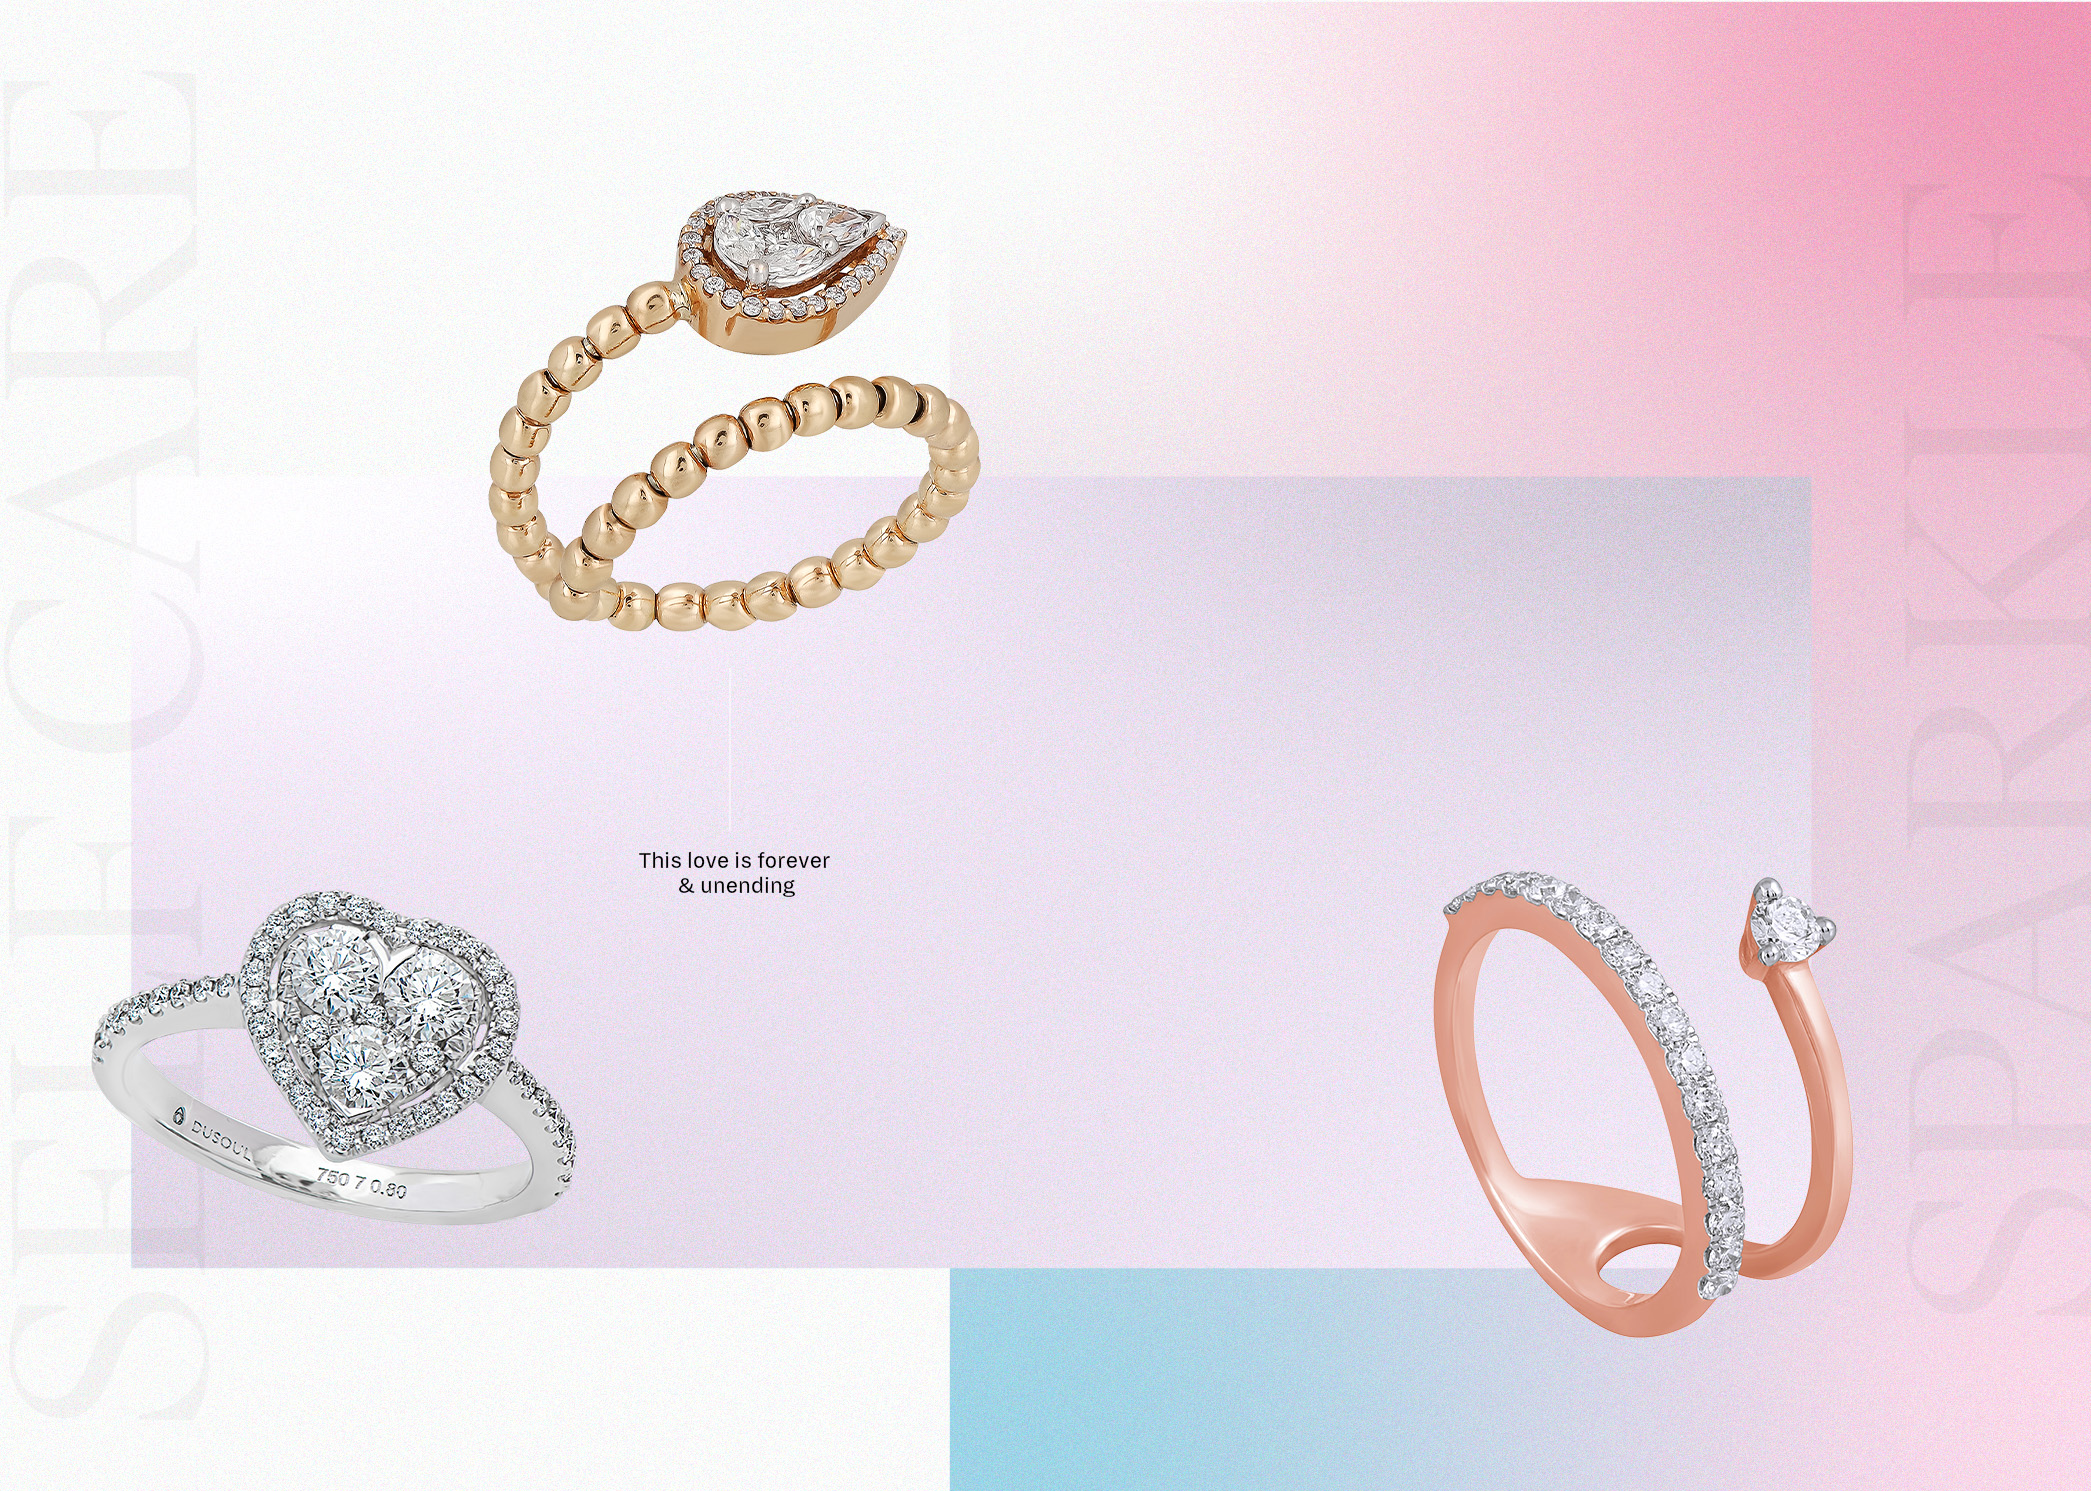 Jewelry: Rose Gold Ring by Shea Luxe, Gold Ring by Al Anwar, Heart Ring by Dusoul by Dhamani 